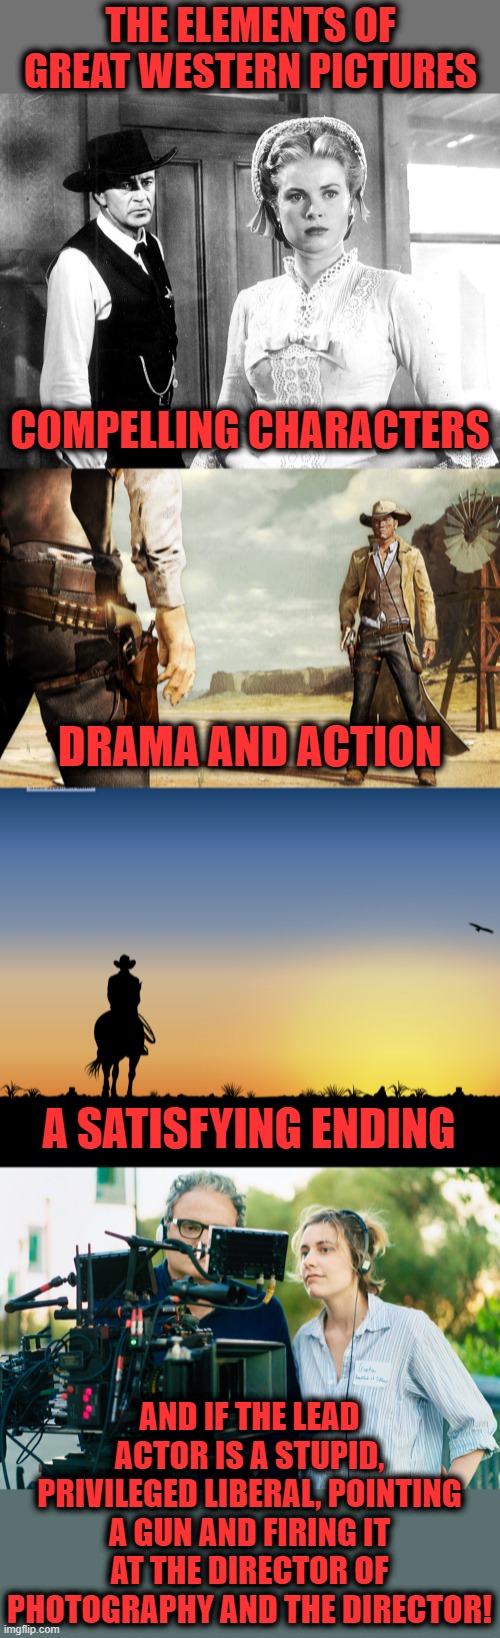 Liberals involved in classic American stories is cultural appropriation of the most obscene kind! | THE ELEMENTS OF GREAT WESTERN PICTURES; COMPELLING CHARACTERS; DRAMA AND ACTION; A SATISFYING ENDING; AND IF THE LEAD ACTOR IS A STUPID, PRIVILEGED LIBERAL, POINTING A GUN AND FIRING IT AT THE DIRECTOR OF PHOTOGRAPHY AND THE DIRECTOR! | image tagged in memes,alec baldwin,westerns,guns,cultural appropriation,movies | made w/ Imgflip meme maker